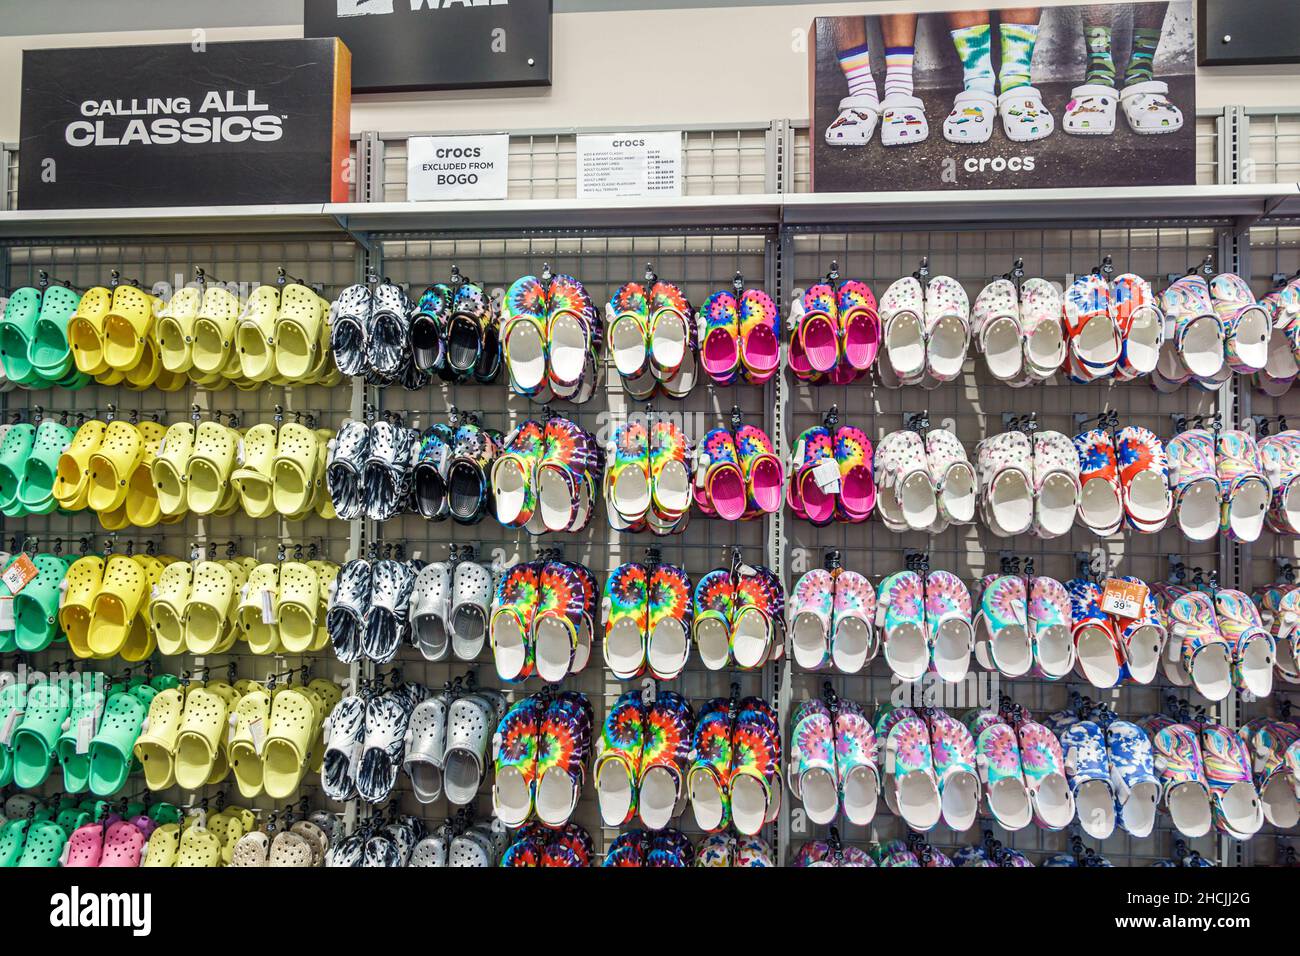 Vero Beach Florida Outlets outlet mall factory store stores shopping Rack  Room Shoes inside interior display sale Crocs Stock Photo - Alamy